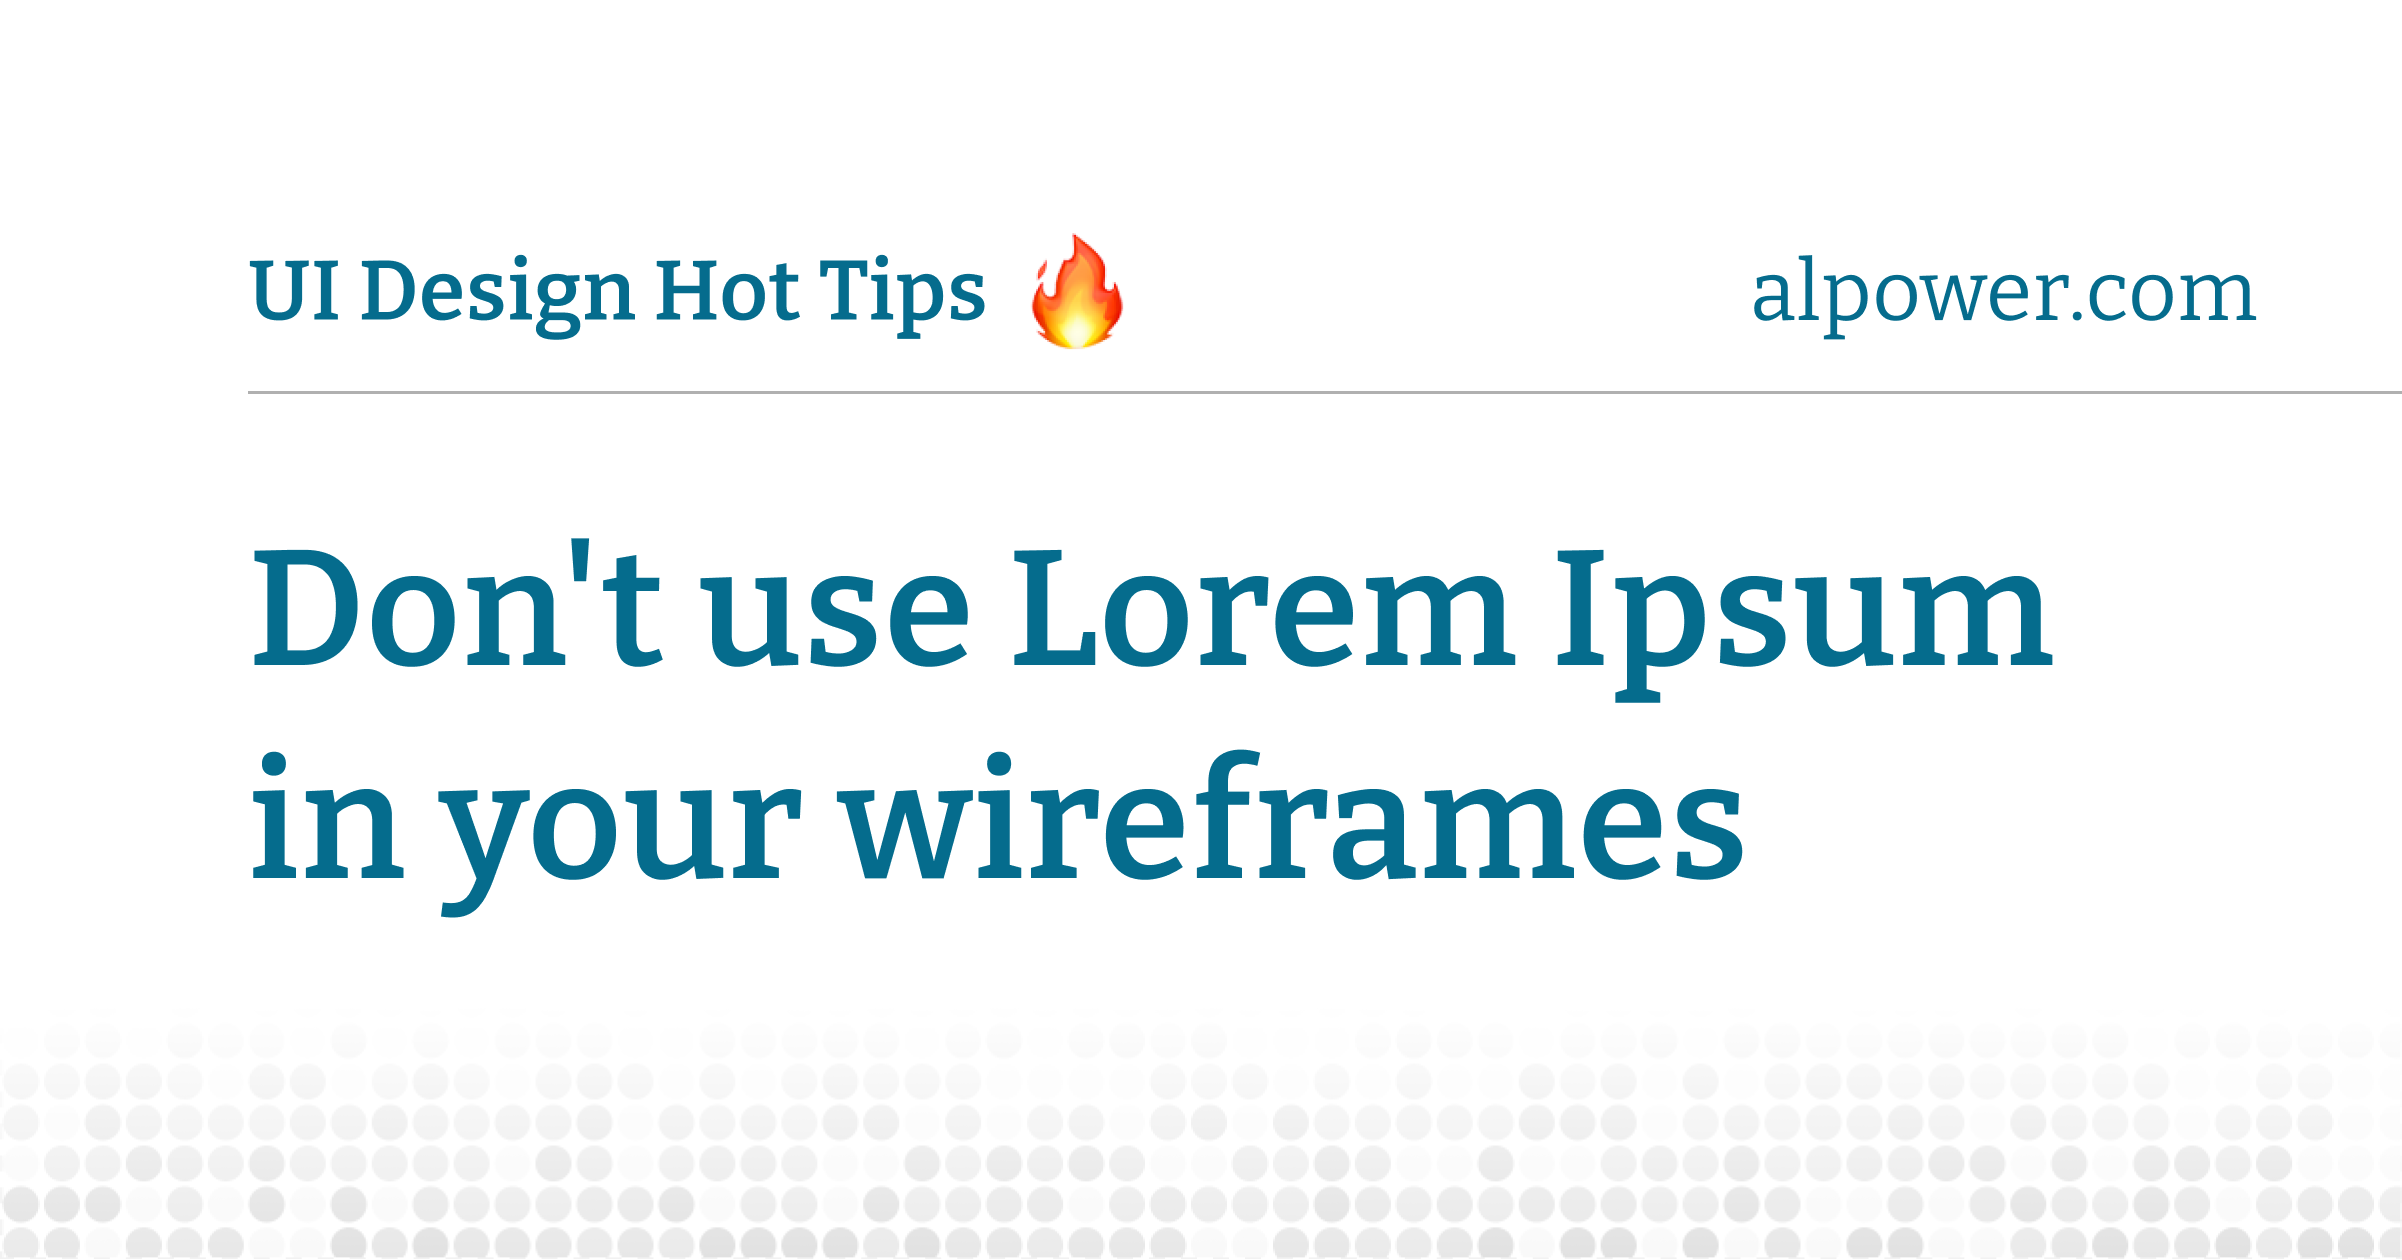 Don't use Lorem Ipsum in your wireframes